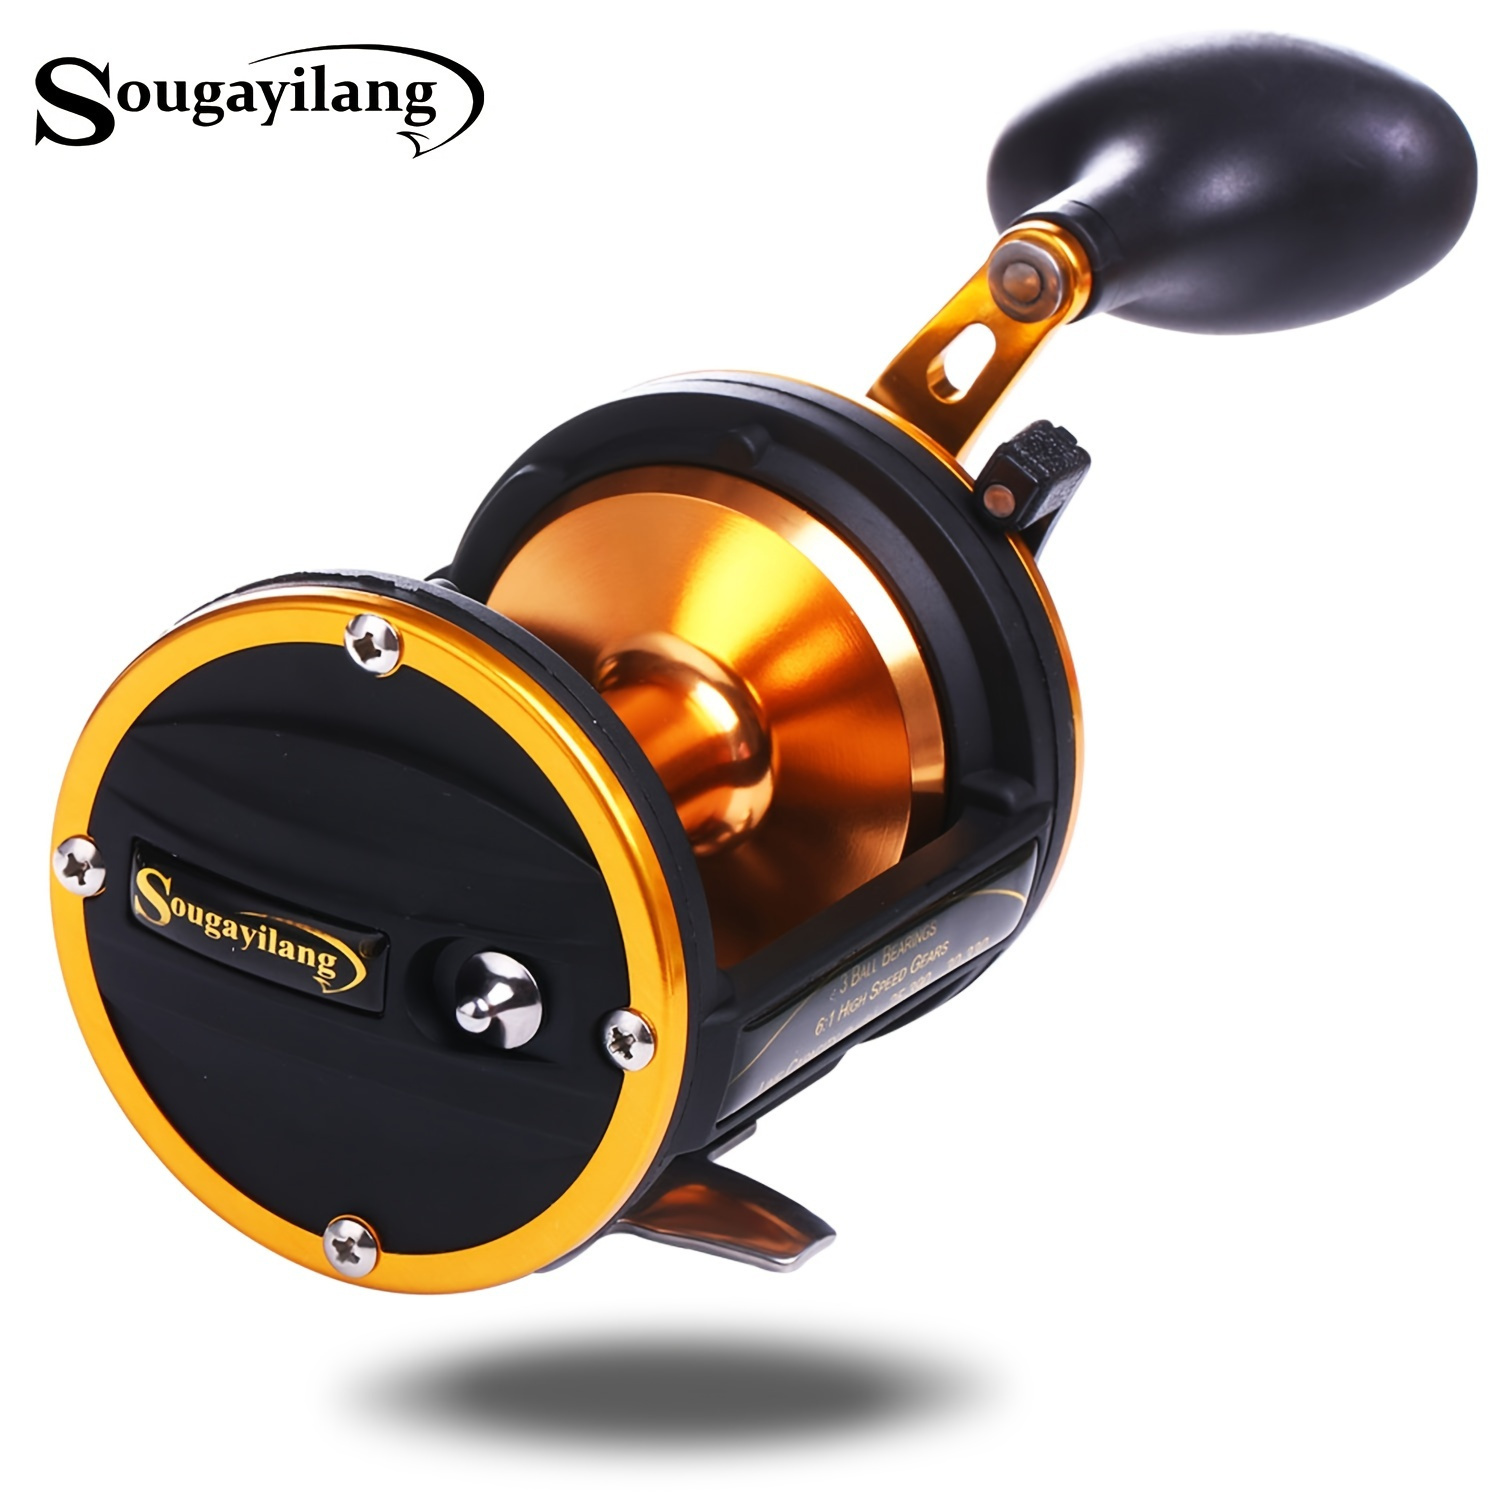  Burning Shark Fishing Reel Round Baitcasting Reel, Smooth  Powerful Line Counter Reel, Saltwater Inshore Surf Trolling Reel,  Conventional Reel for Catfish, Musky, Bass, Pike- ECTC15R : Sports &  Outdoors